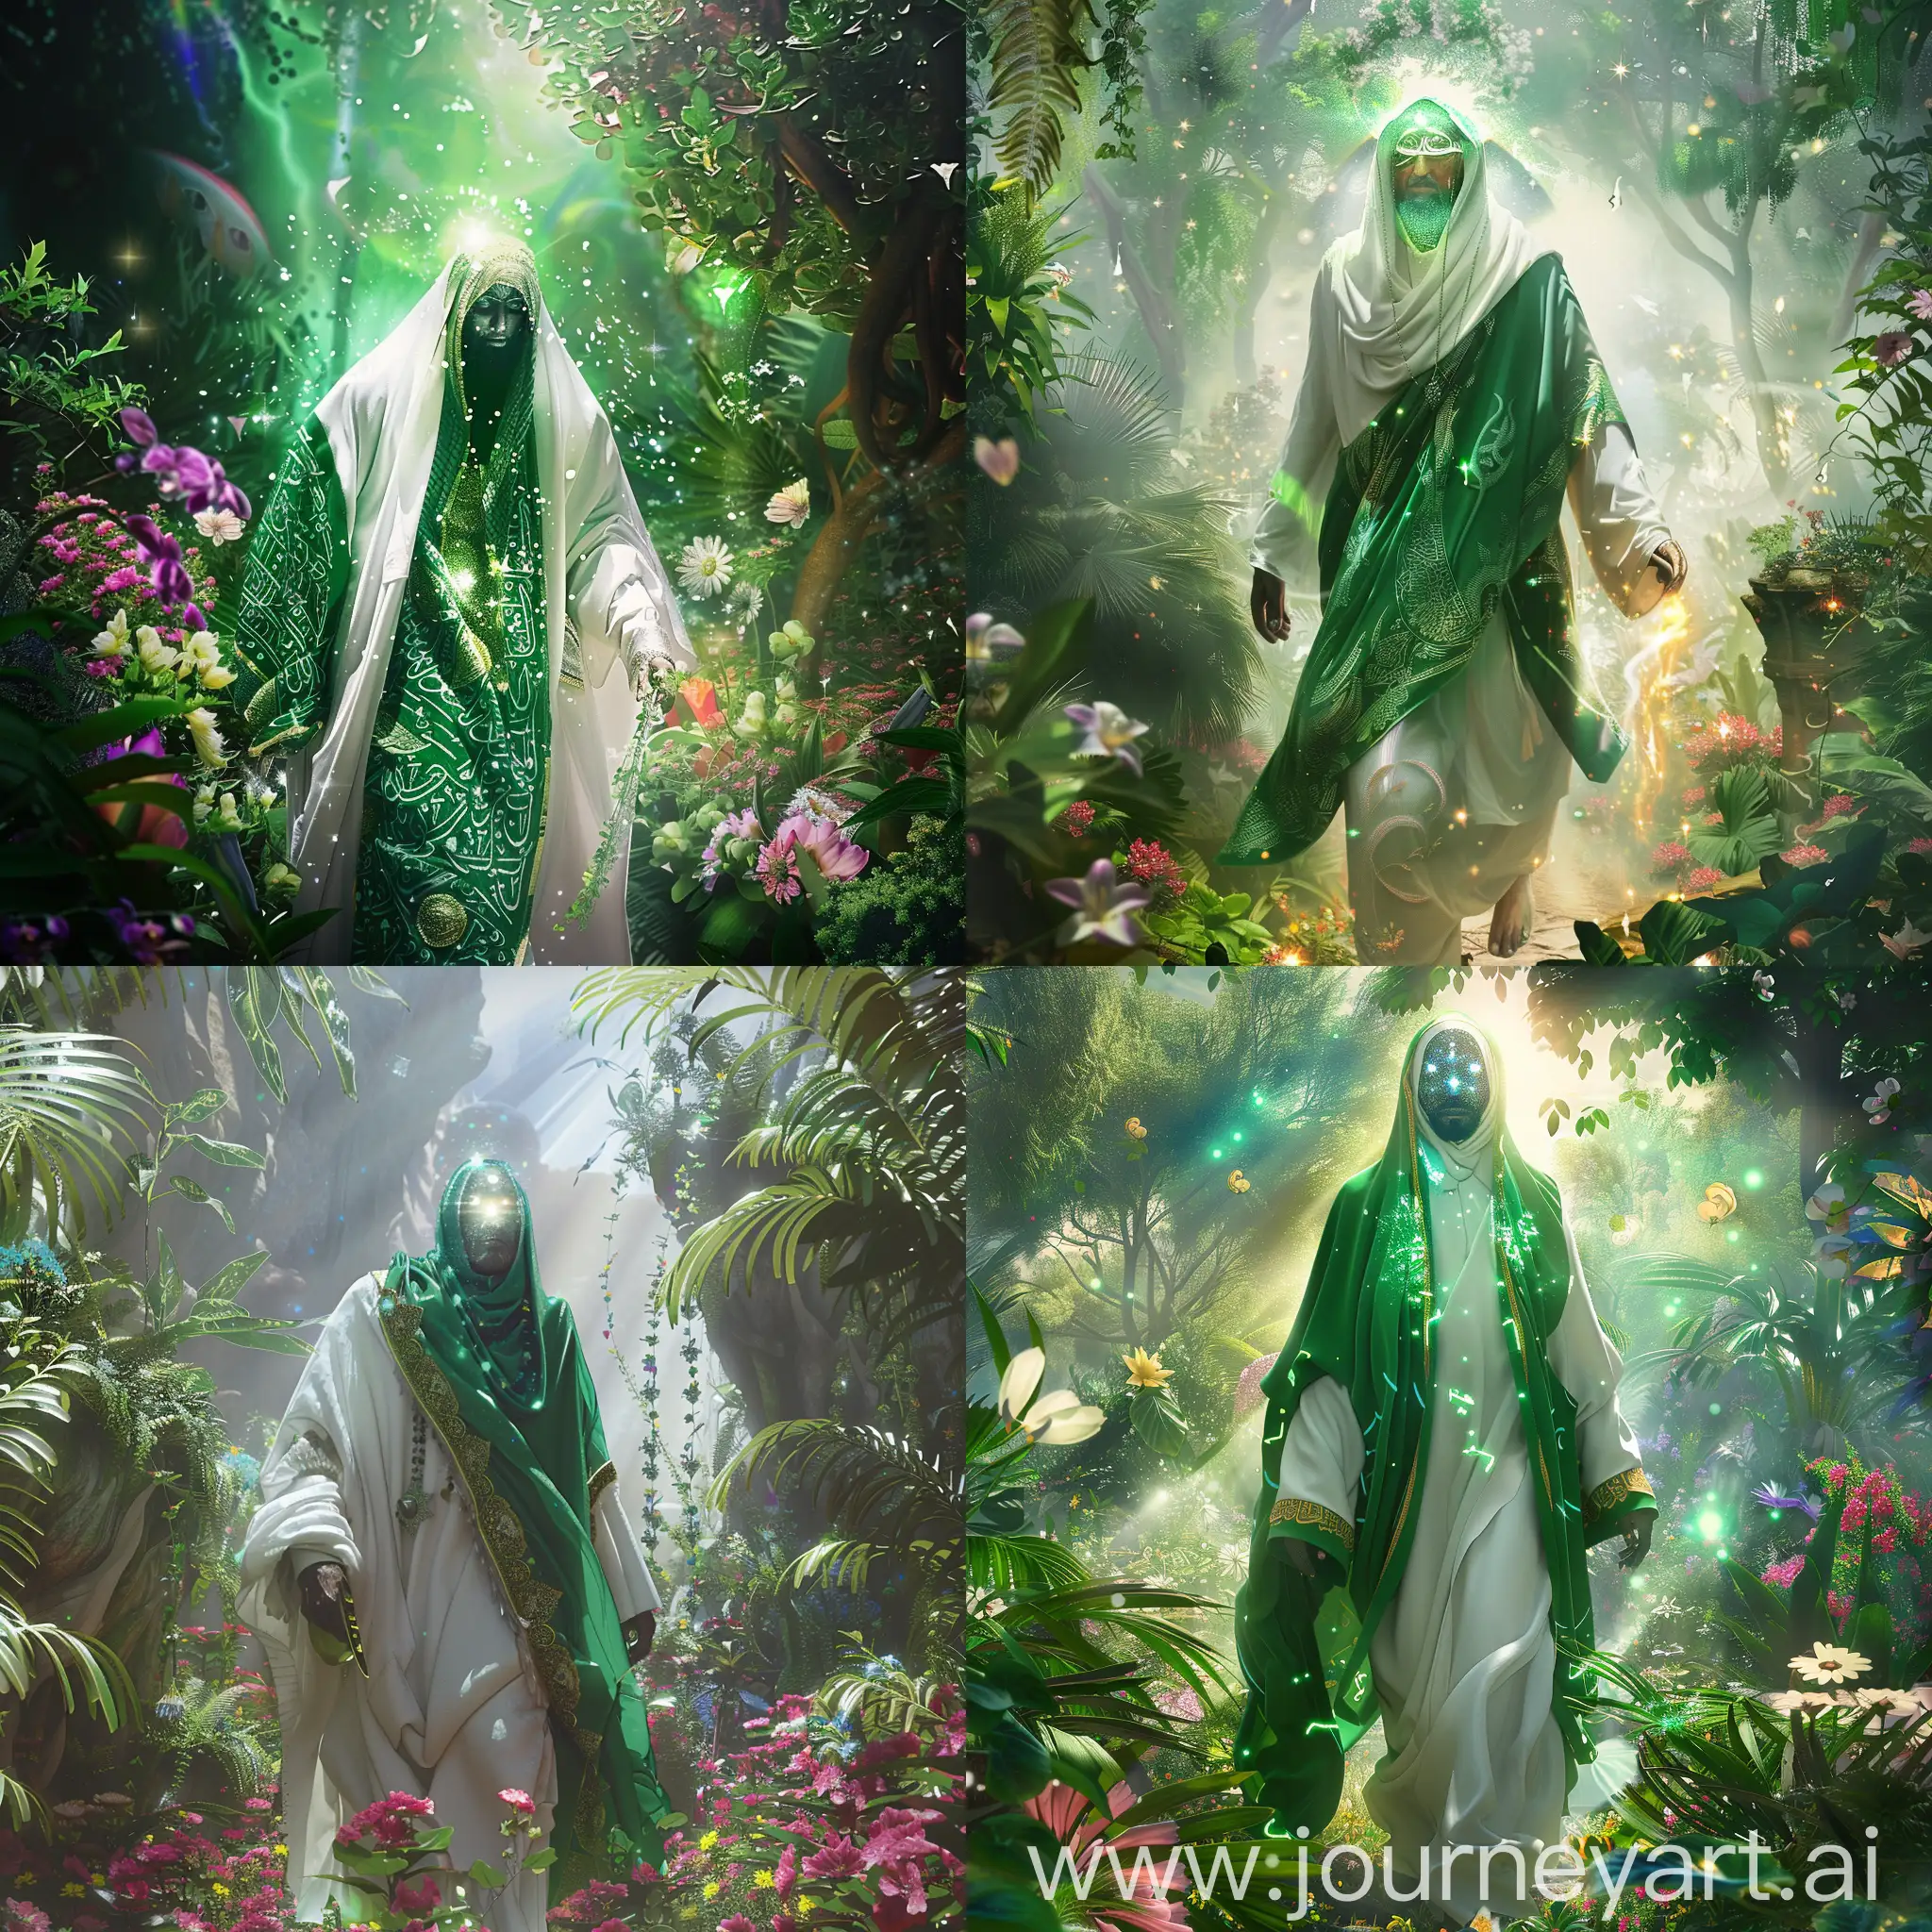 A holly islamic man with green and white arabic clothes and a shining face (no face is recognisable ) walking into a cosmic beautiful jungle and flowers